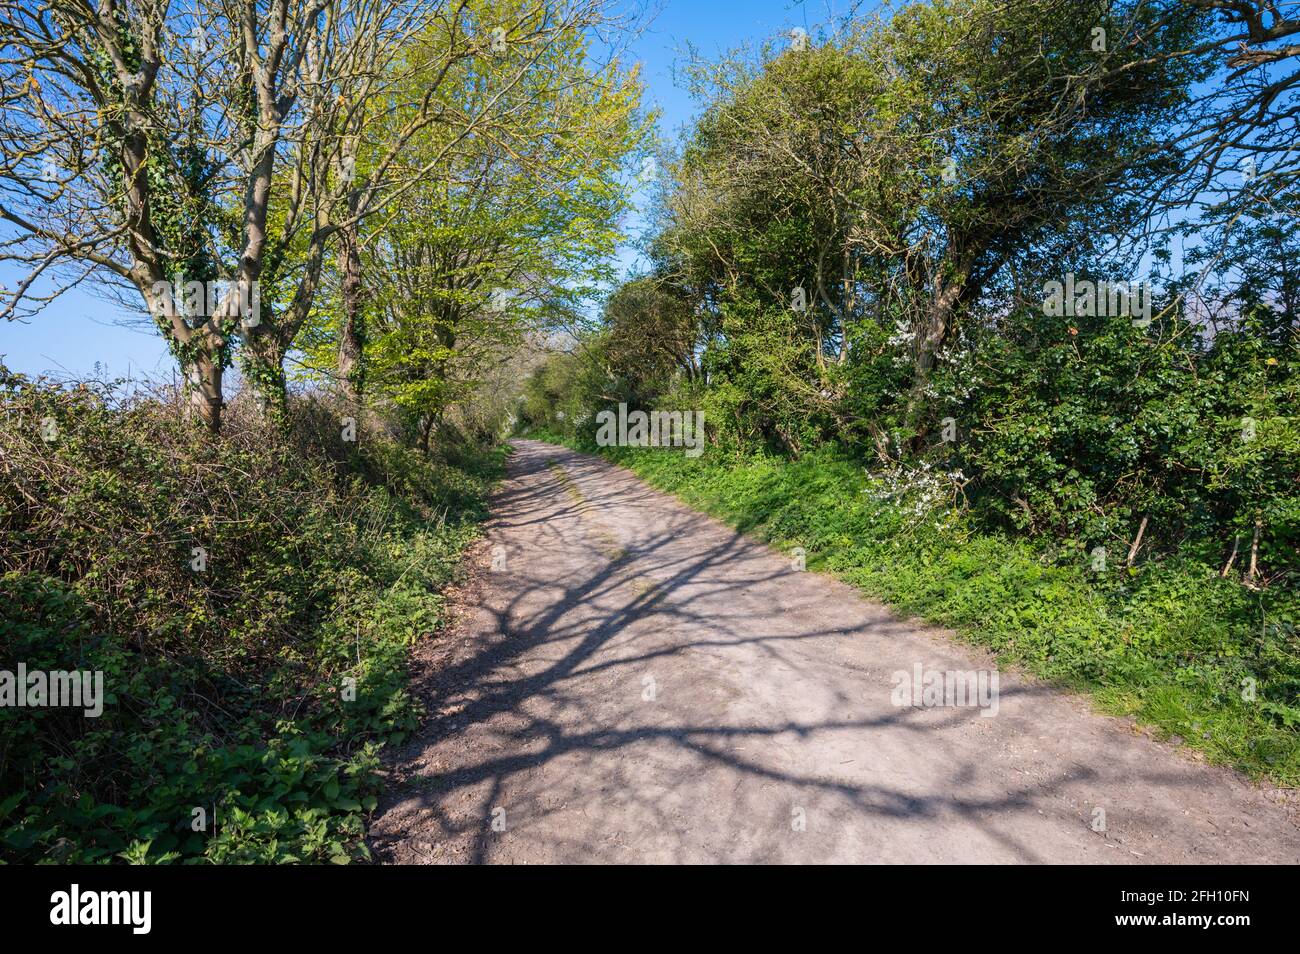 Straight dirt road or country track with no road markings with trees & hedges lining the road in the British countryside in West Sussex, England, UK. Stock Photo